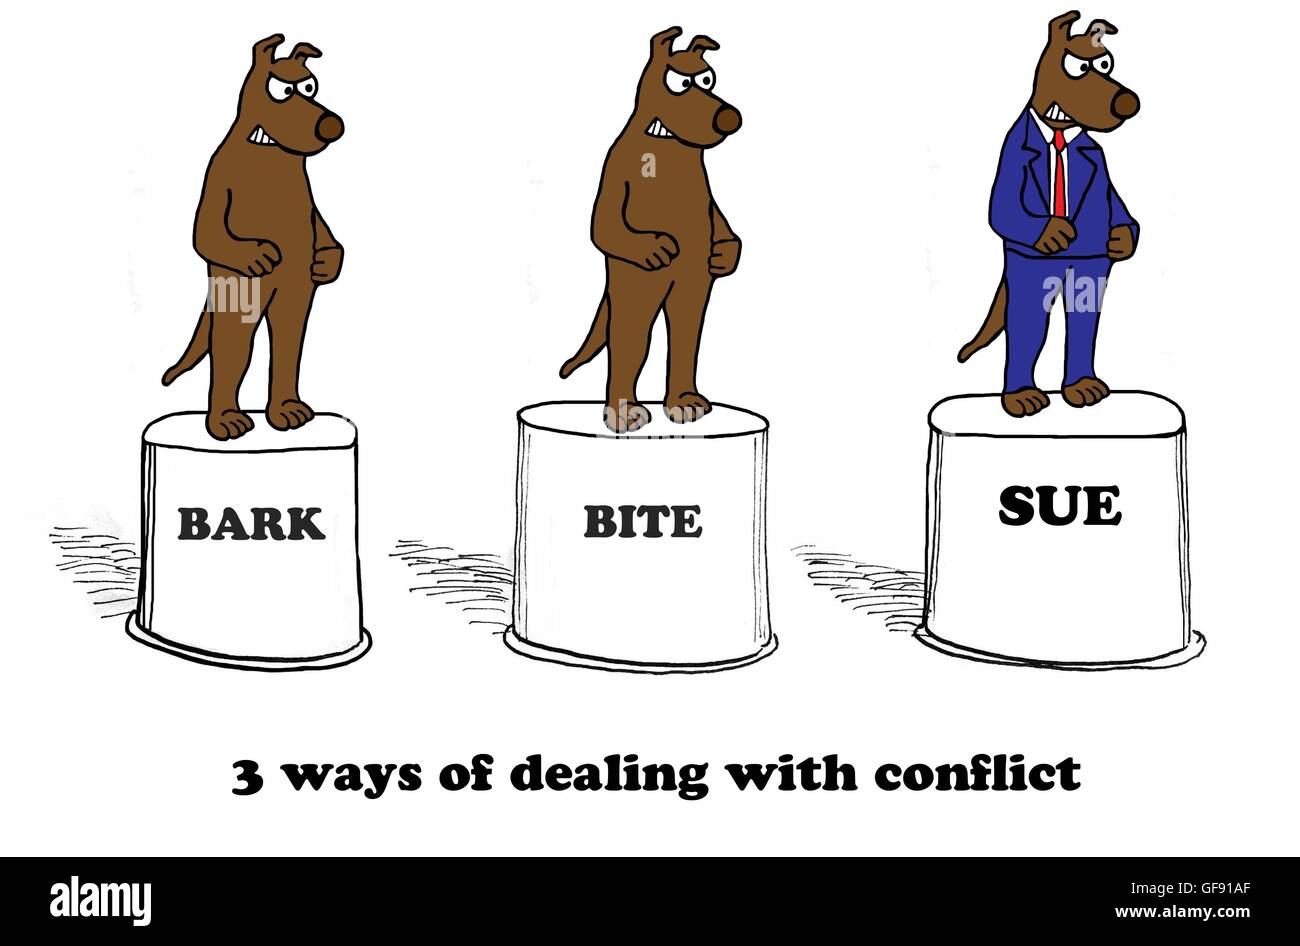 Cartoon about ways to deal with conflict. Stock Photo